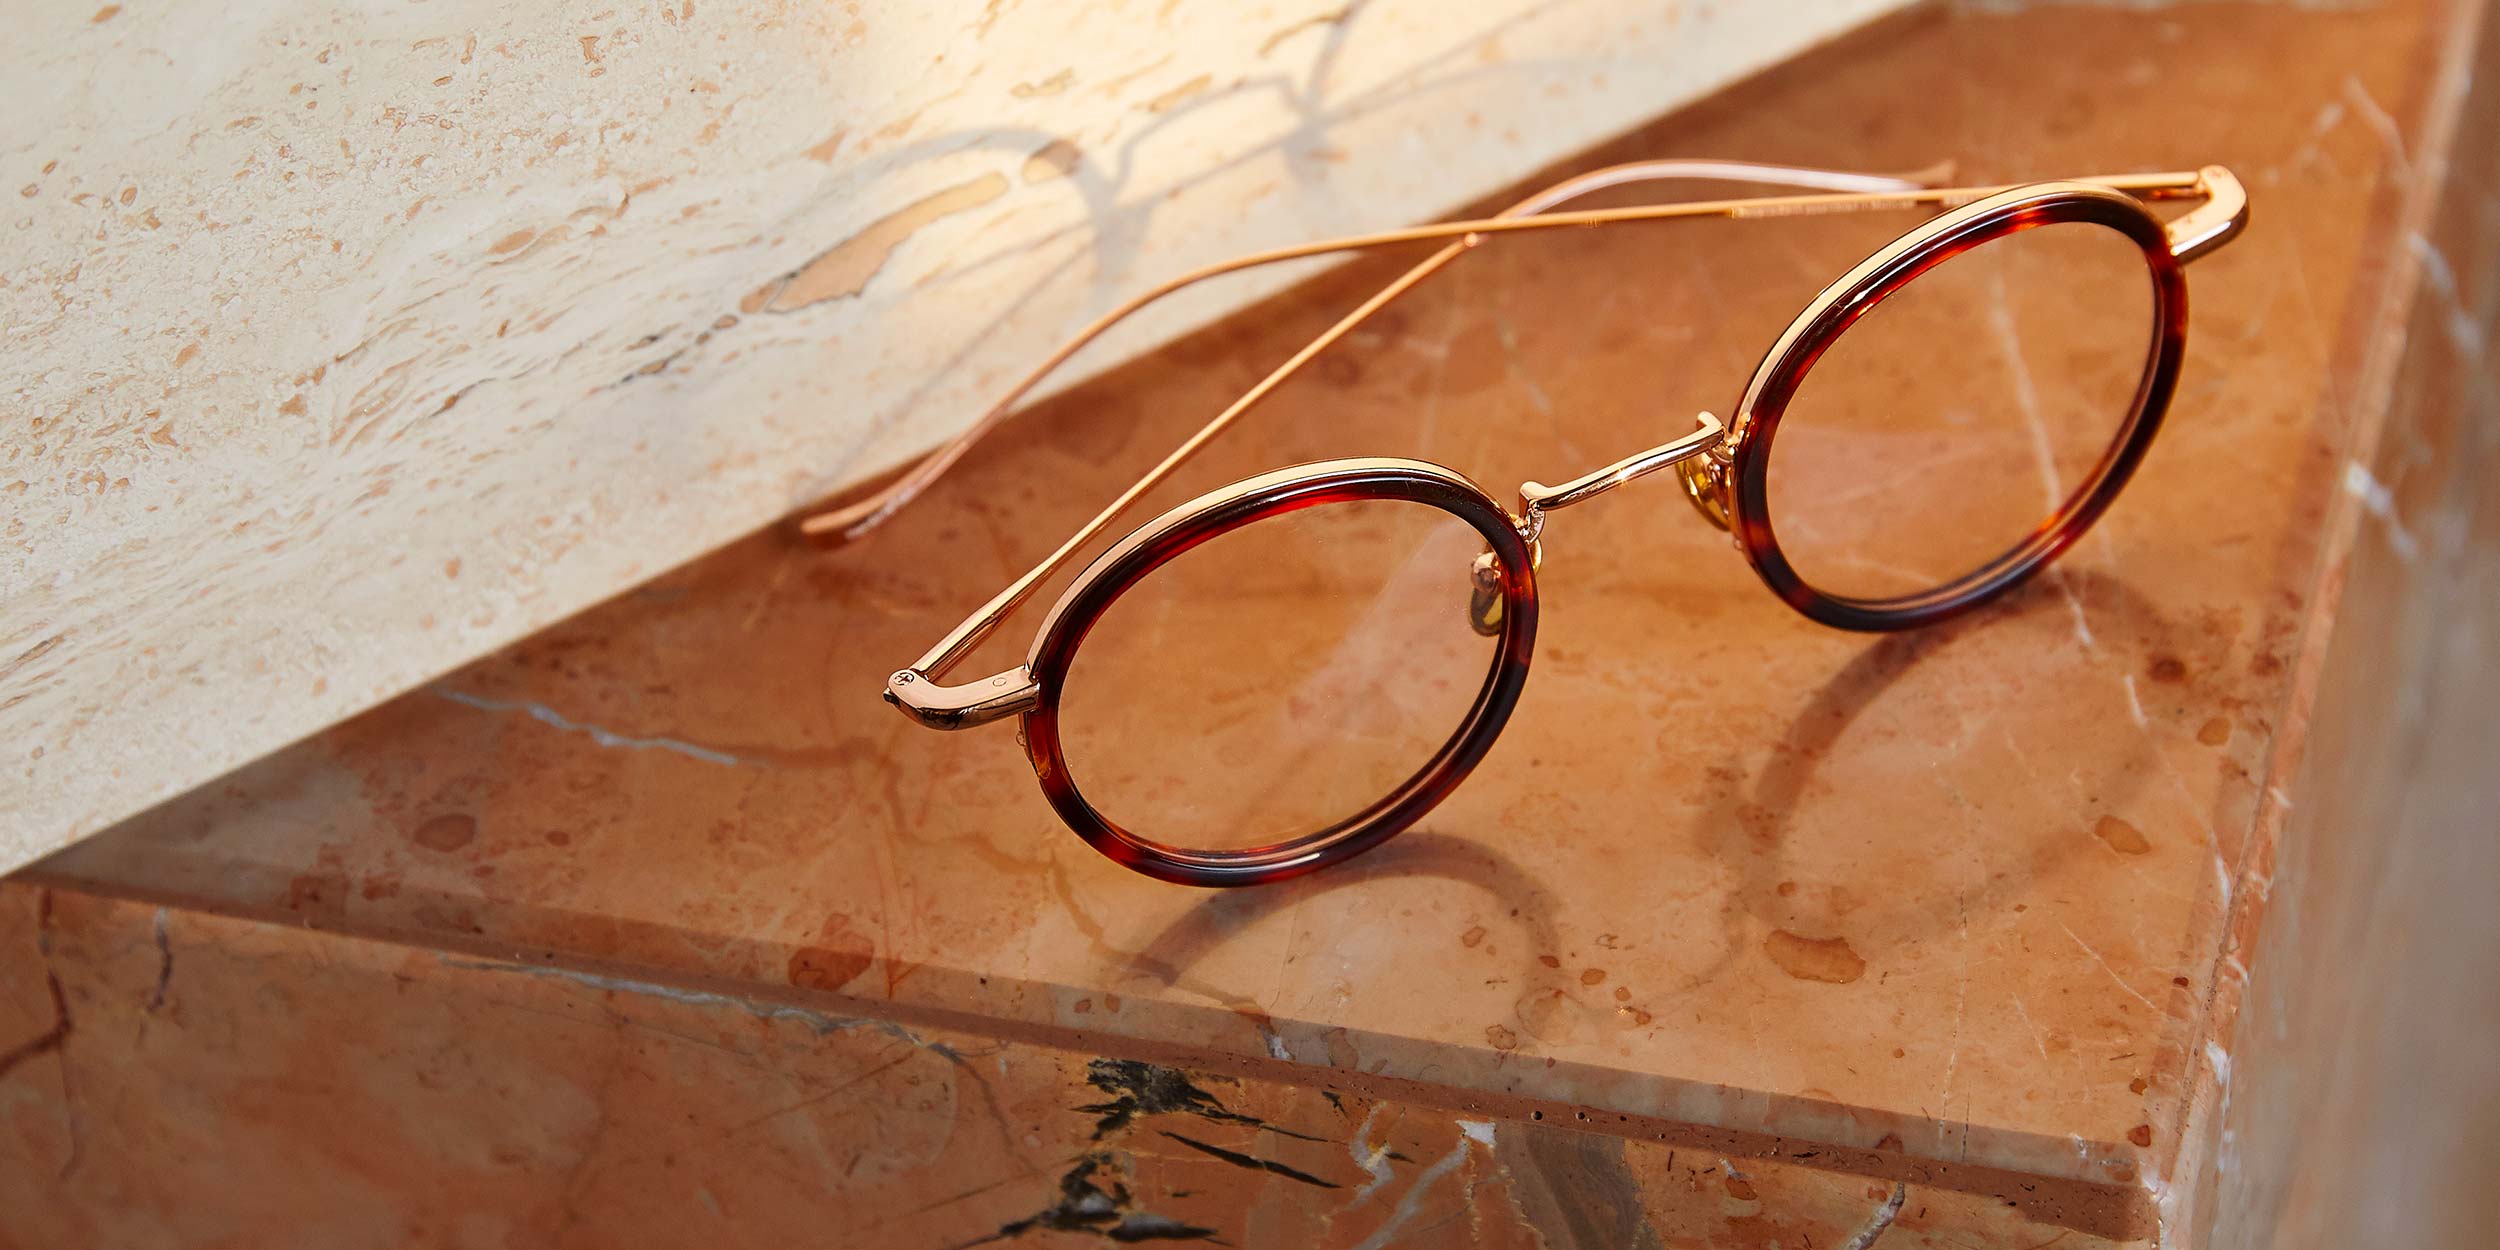 Photo Details of Nicolas Black & Gold Reading Glasses in a room